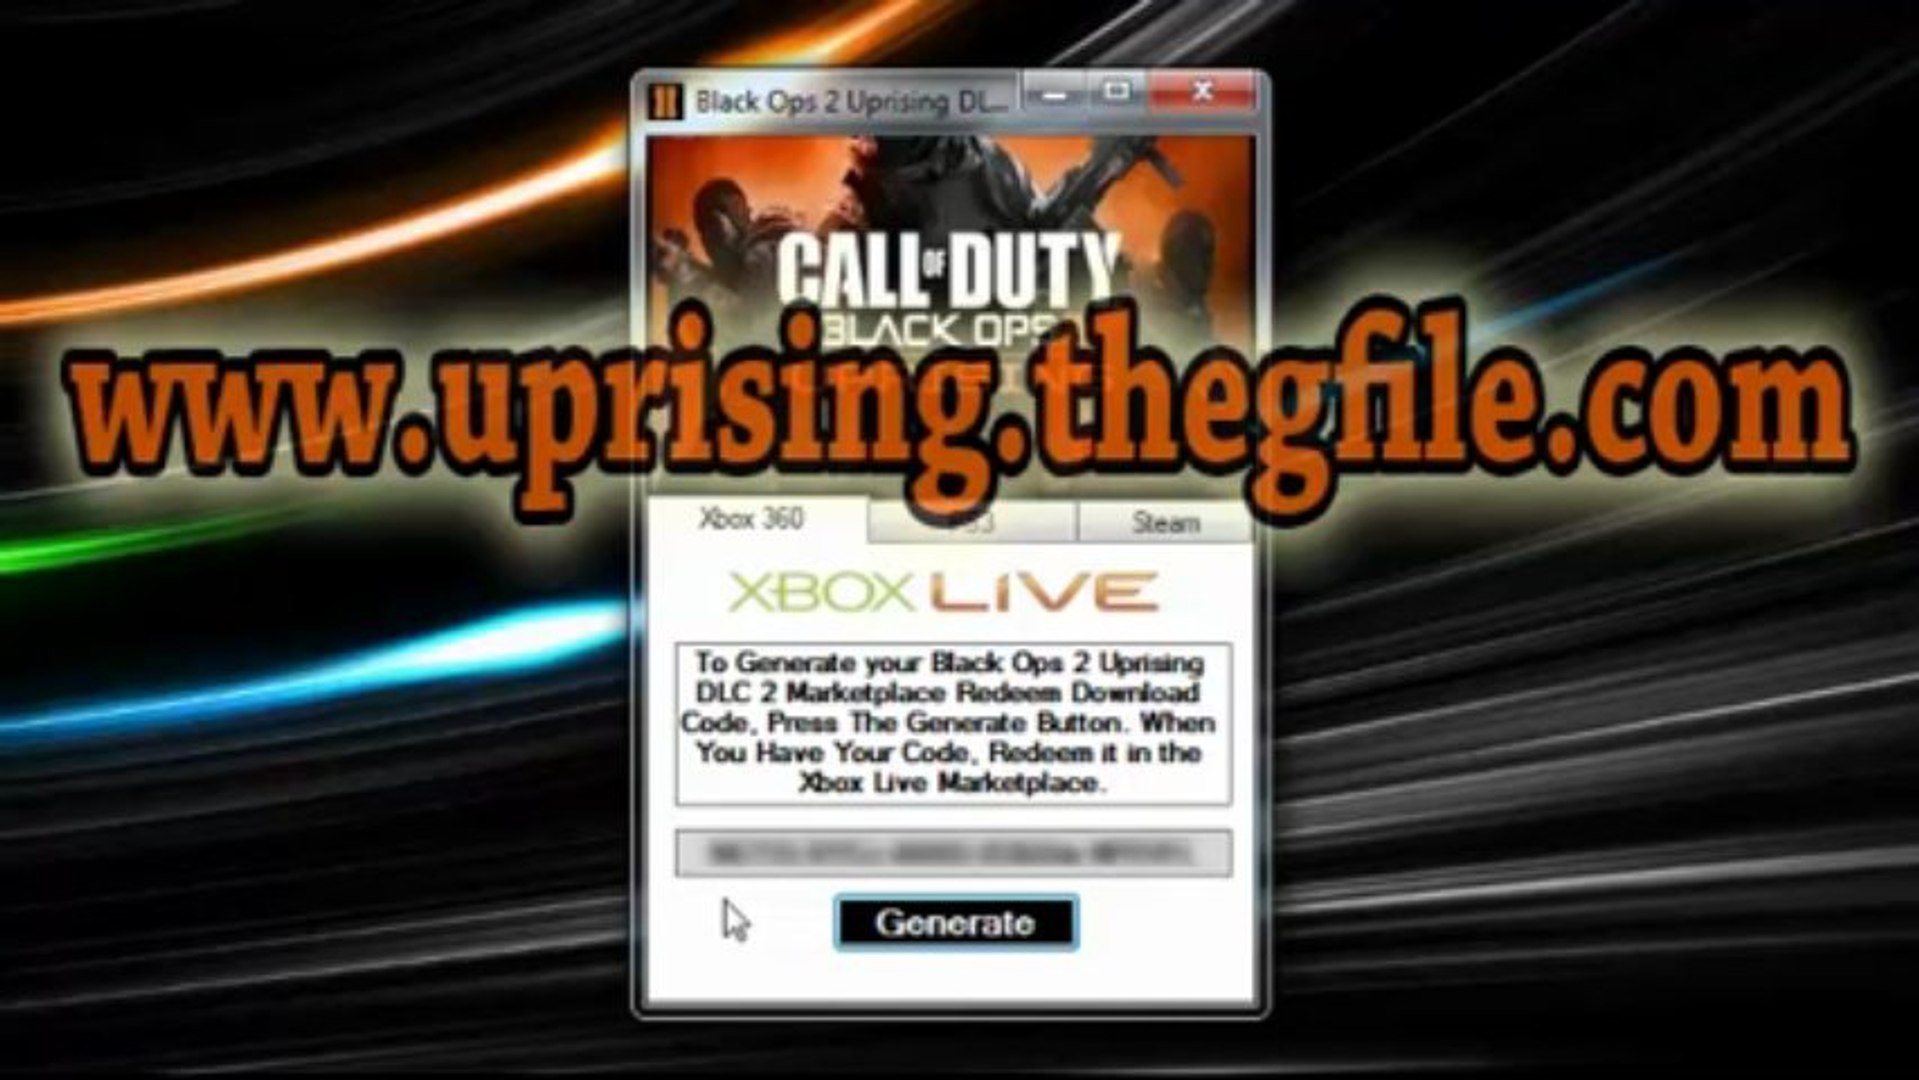 Black Ops 2 Uprising Map Pack DLC Redeem Codes - Xbox 360, PS3 and PC -  video Dailymotion